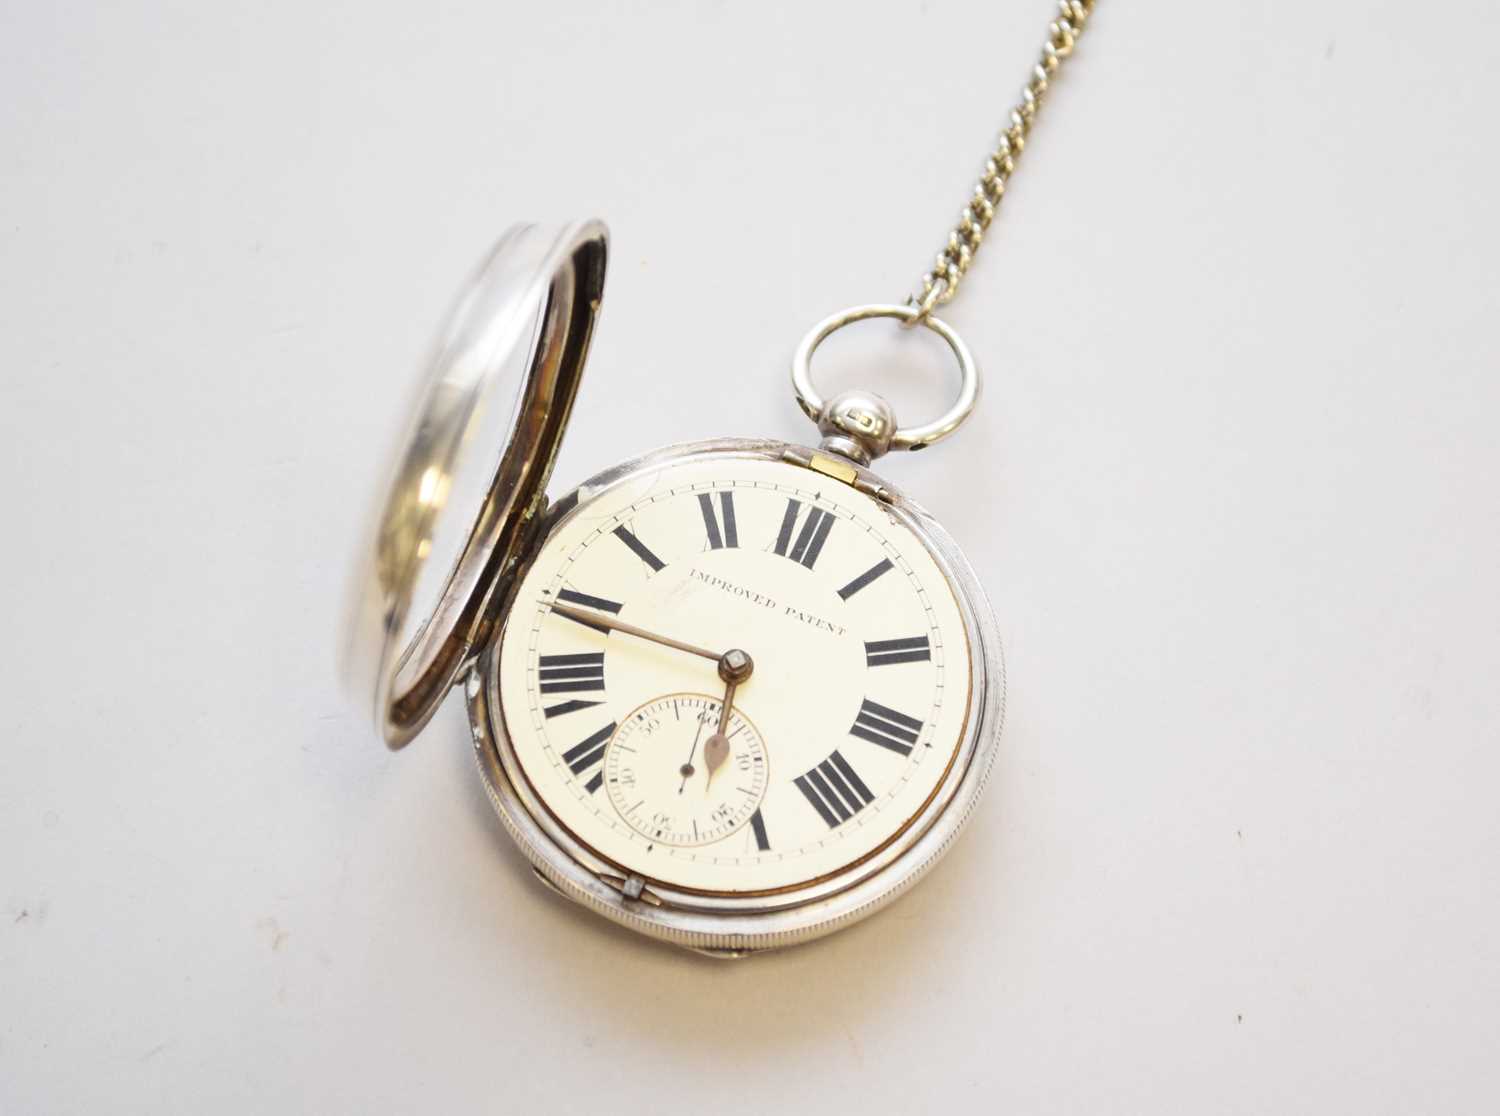 An early 20th century silver cased open face pocket watch